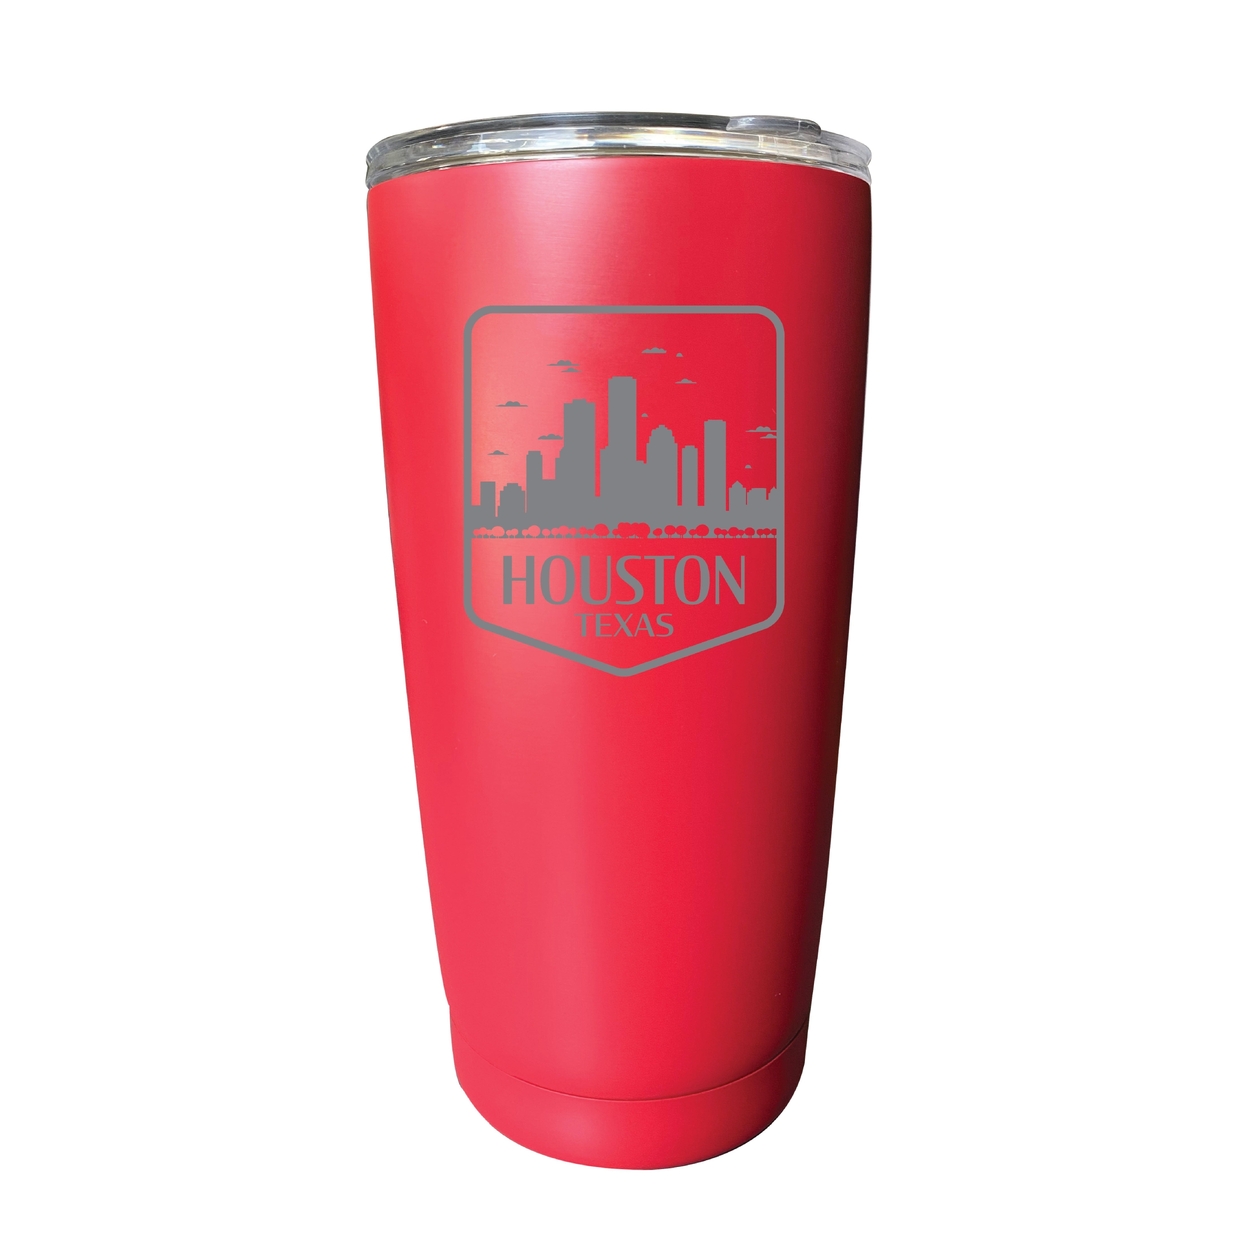 Houston Texas Souvenir 16 Oz Engraved Stainless Steel Insulated Tumbler - Red,,4-Pack